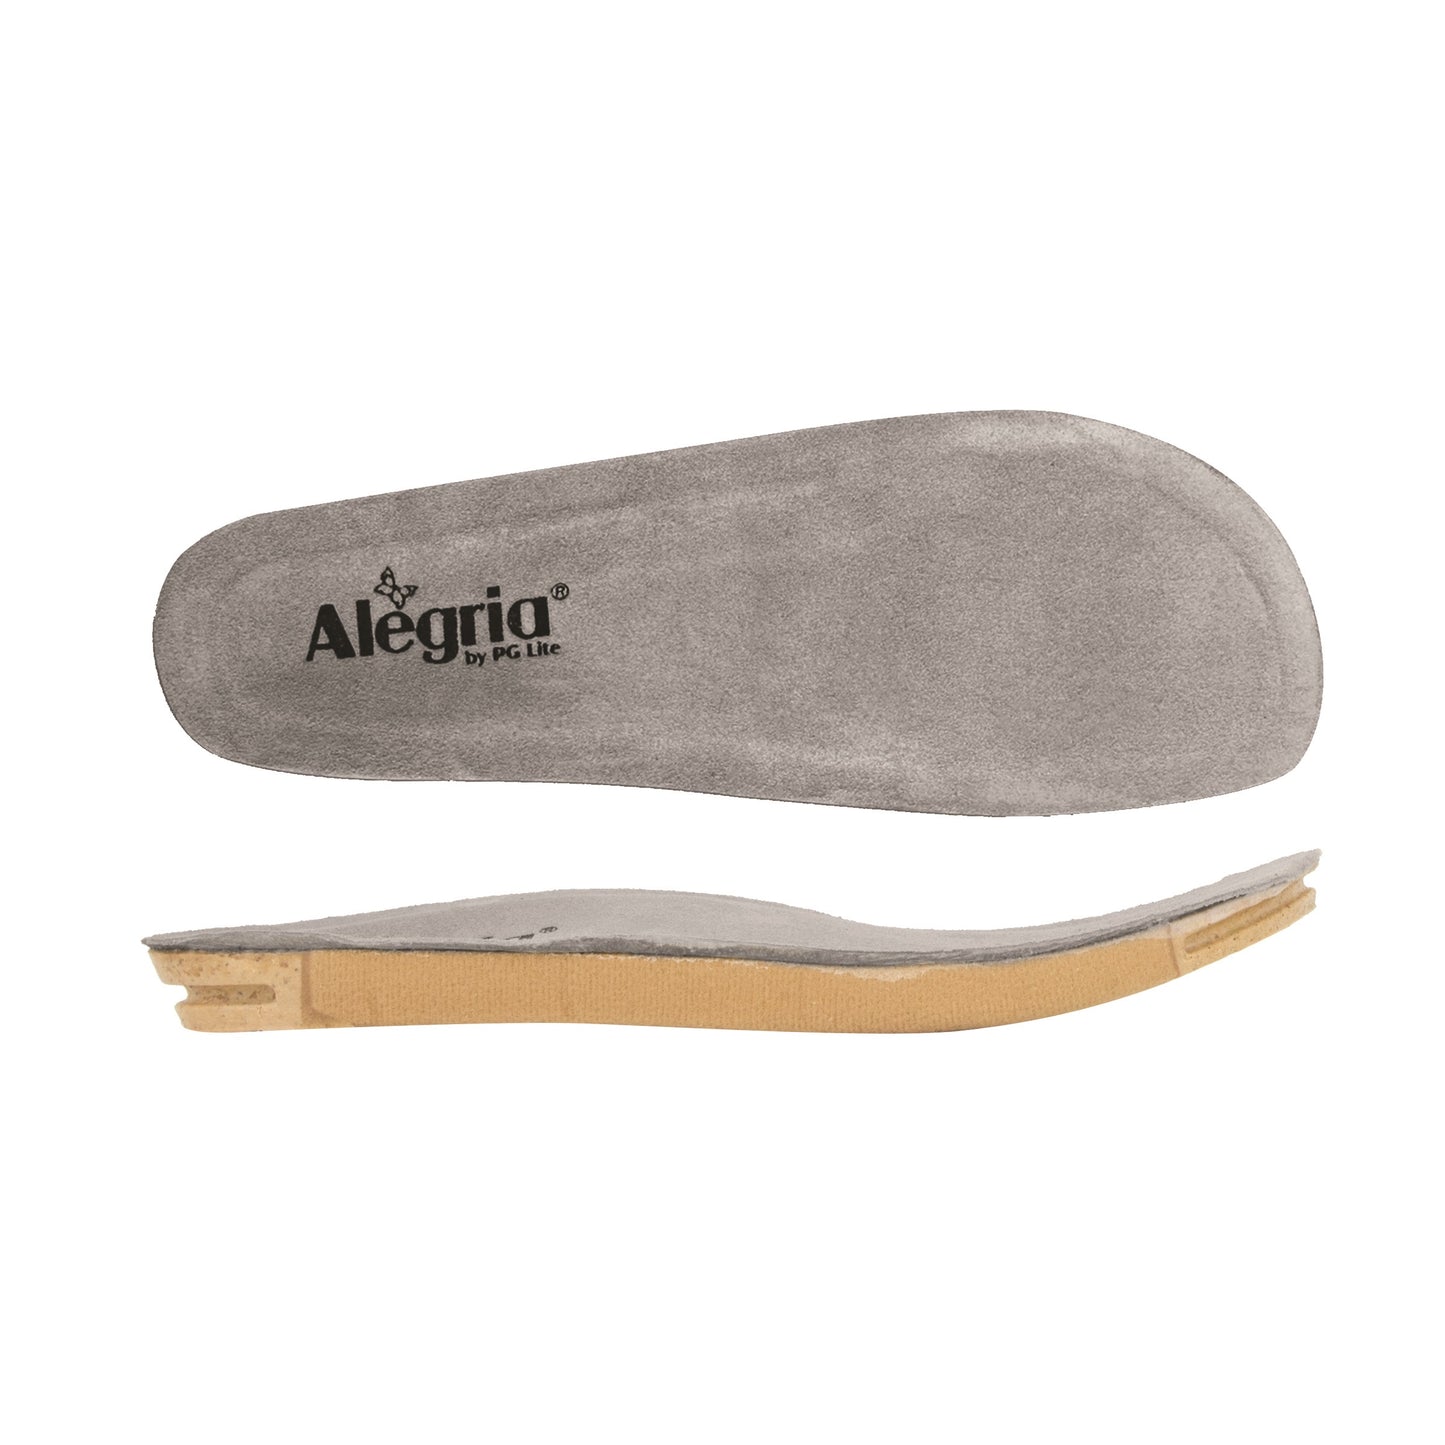 Alegria Footbed Inserts Wide